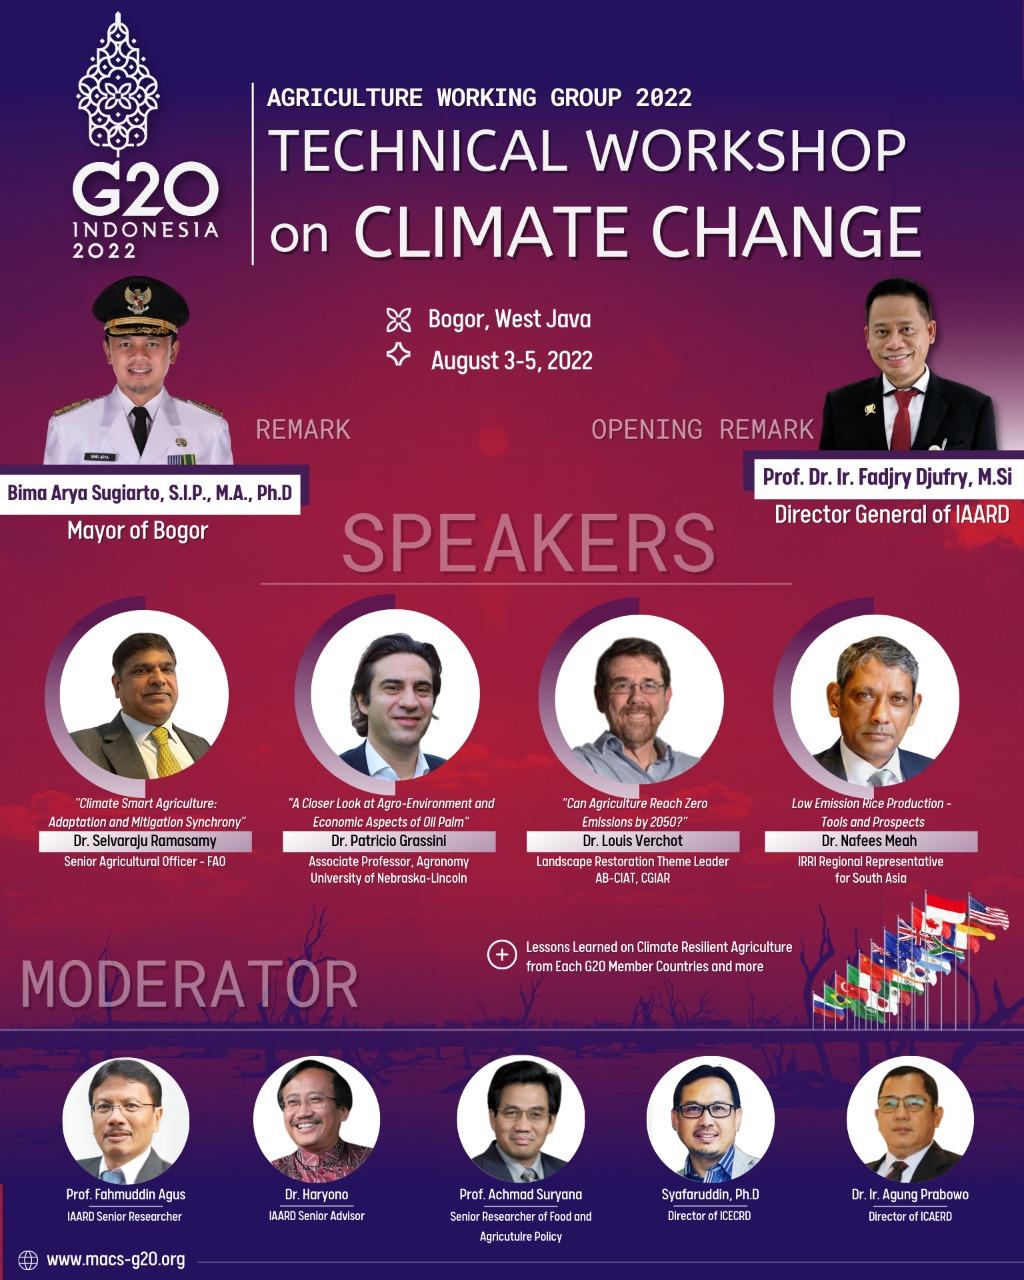 G20 Indonesia 2022 climate change technical workshop